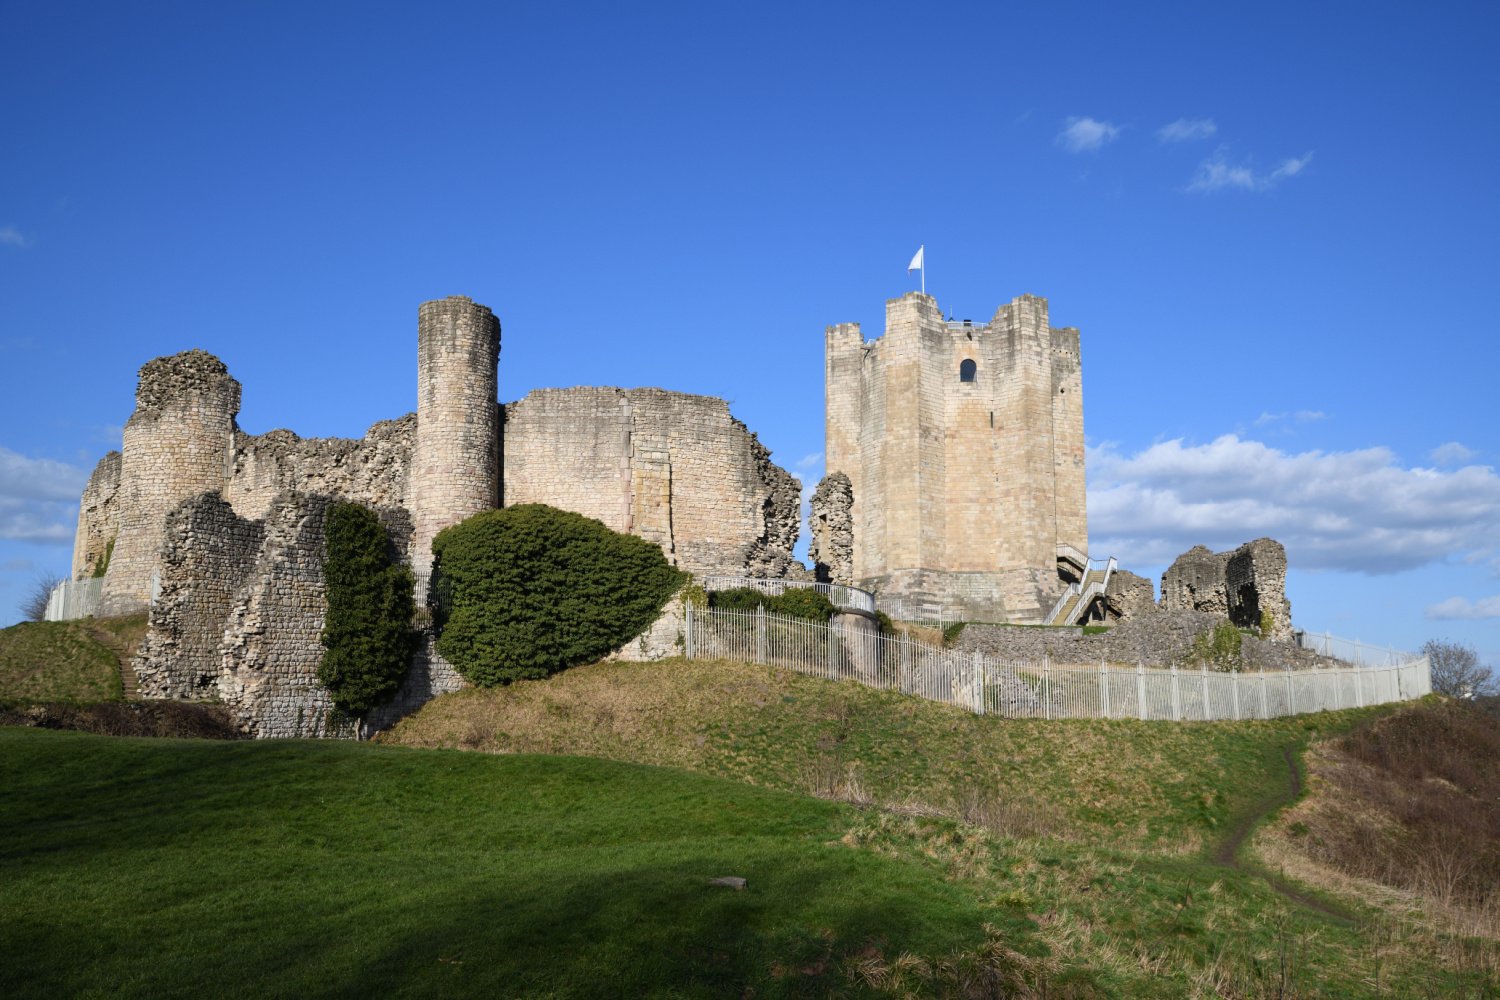 Image name conisbrough castle near doncaster south yorkshire the 28 image from the post A look at the history of Conisbrough Castle, with Dr Emma Wells in Yorkshire.com.